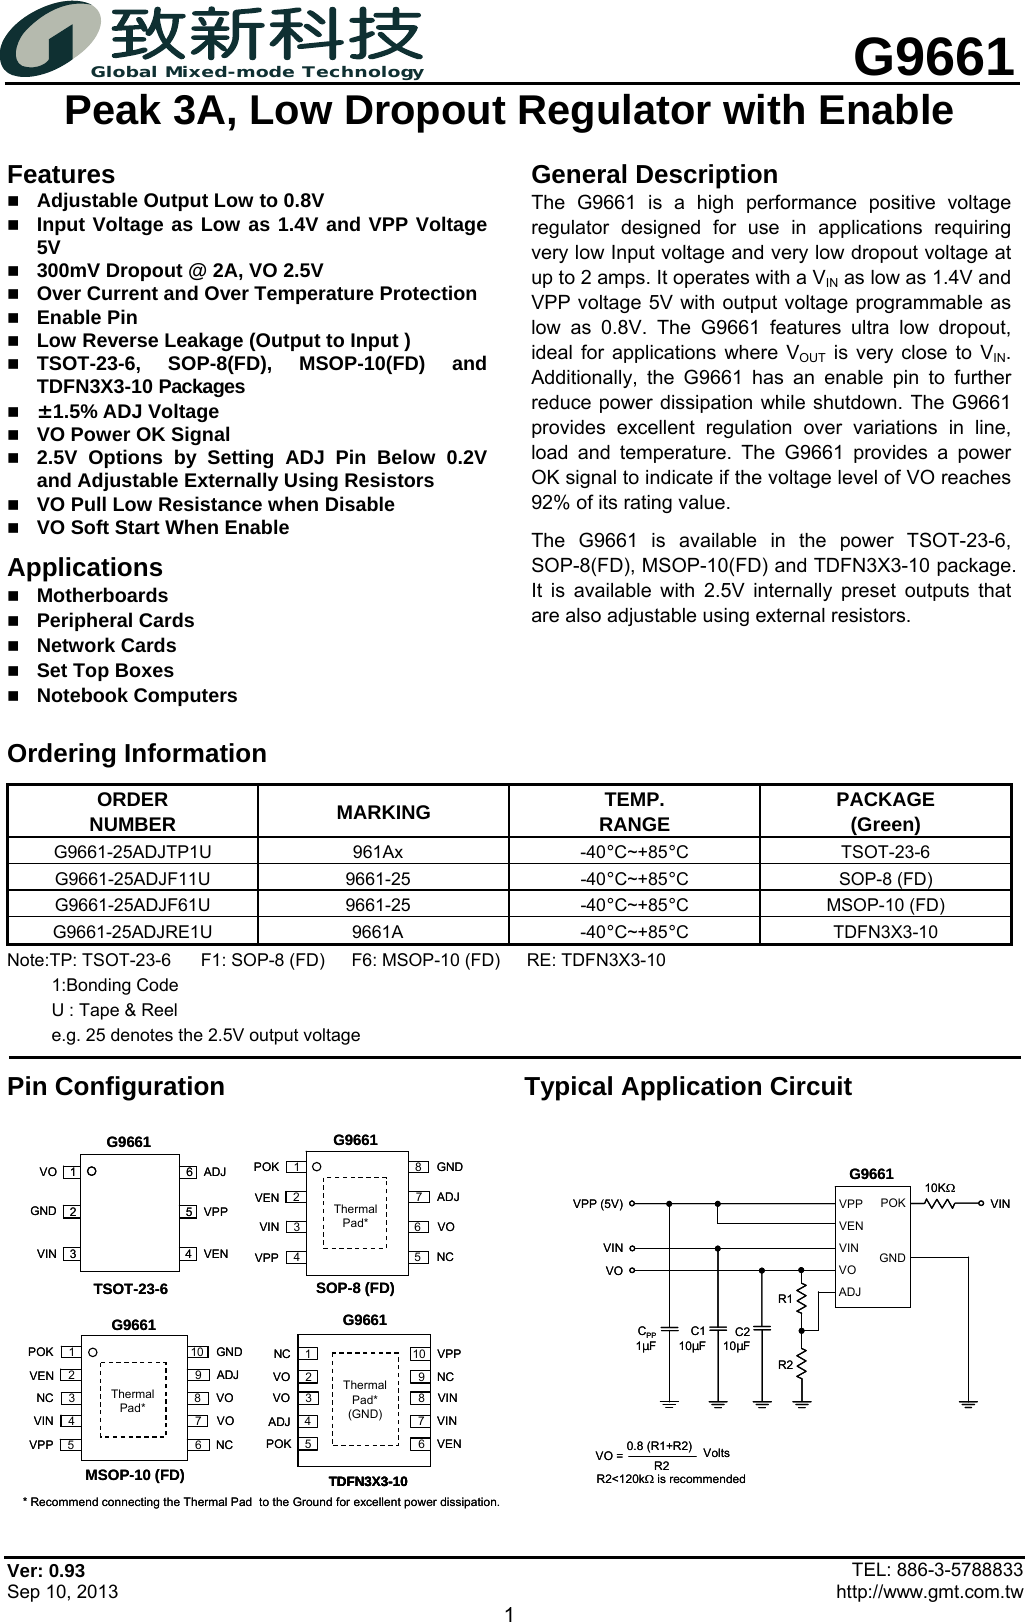 Page 1 of 2 - G9661 - Datatsheet. Www.s-manuals.com. R0.93 Gmt